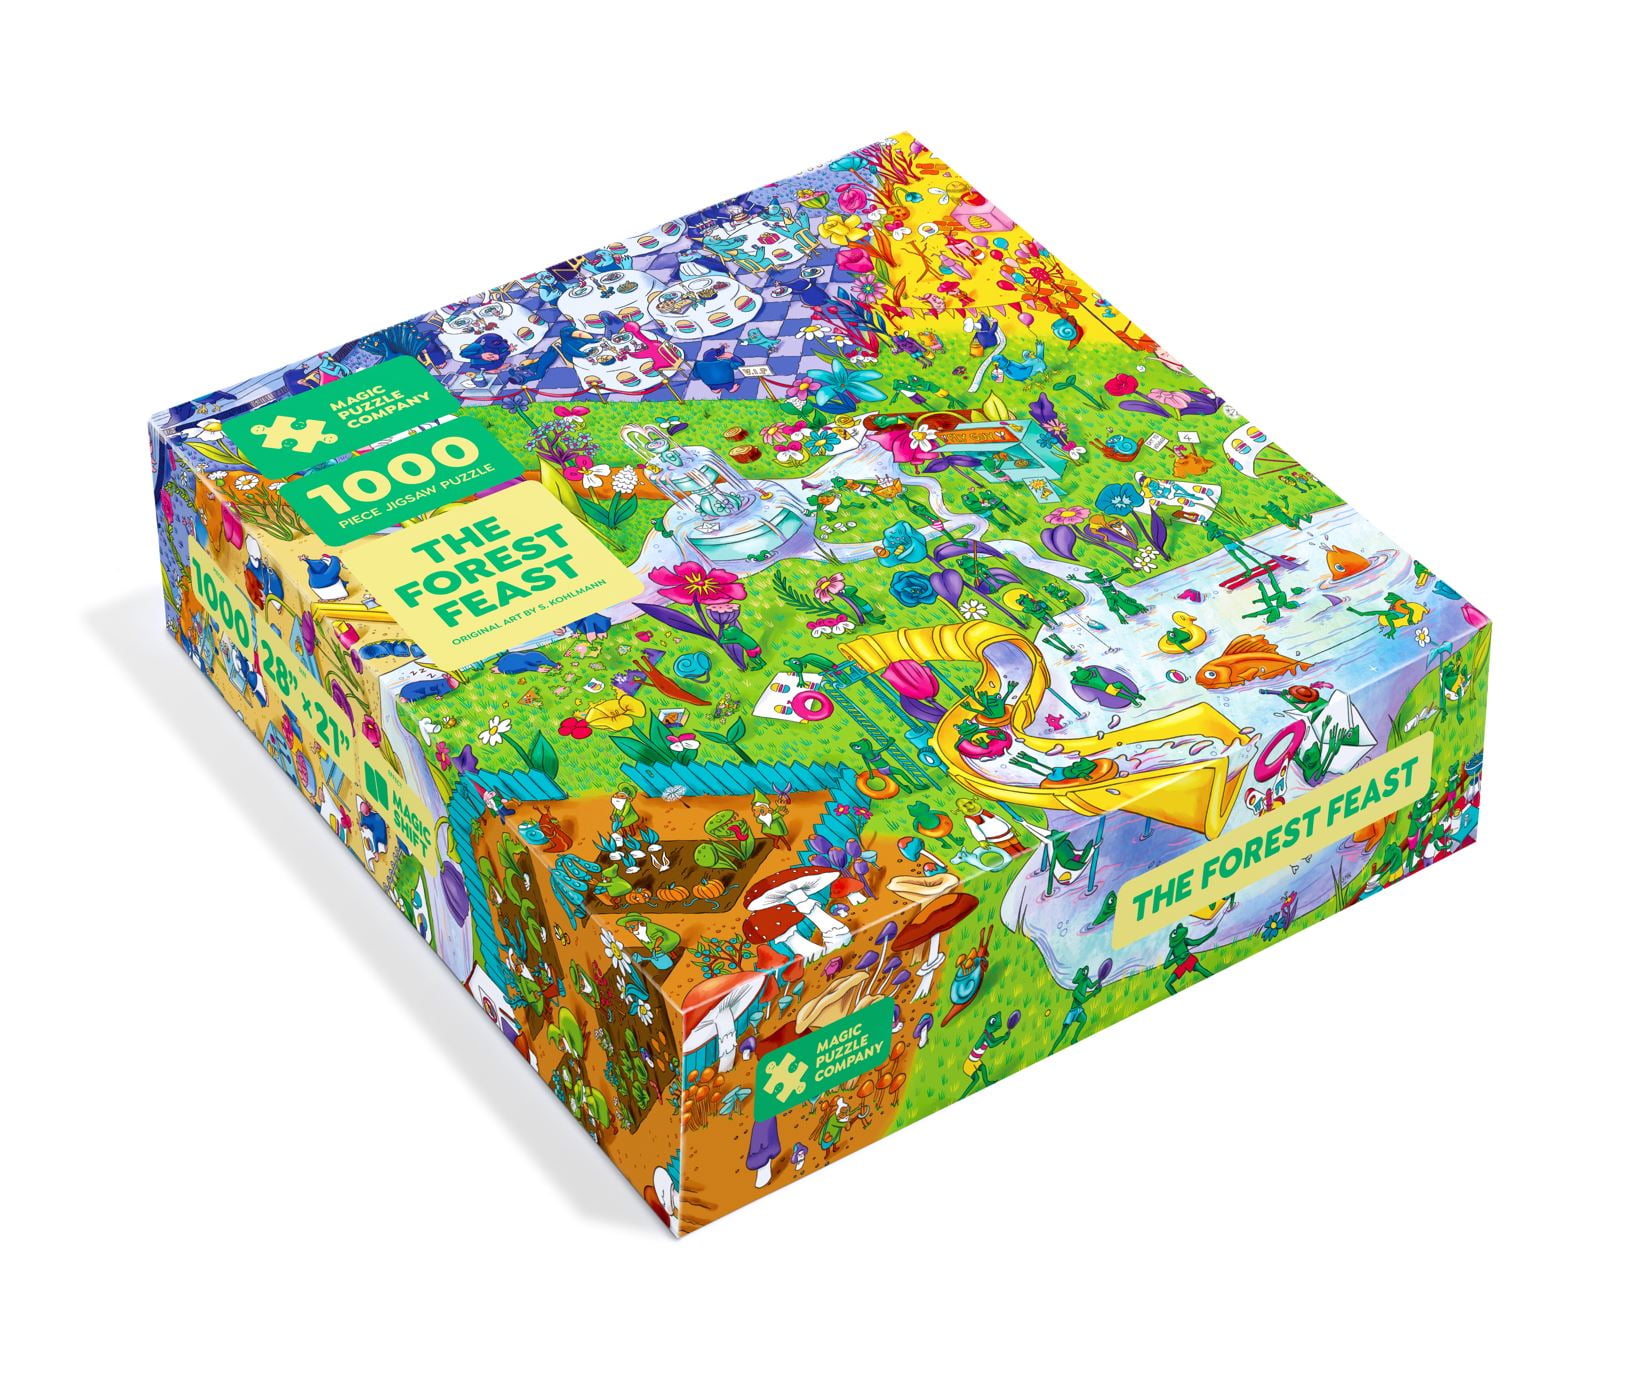 The Forest Feast • 1000 Piece Jigsaw Puzzle from The Magic Puzzle Company •  Series Two - Walmart.com